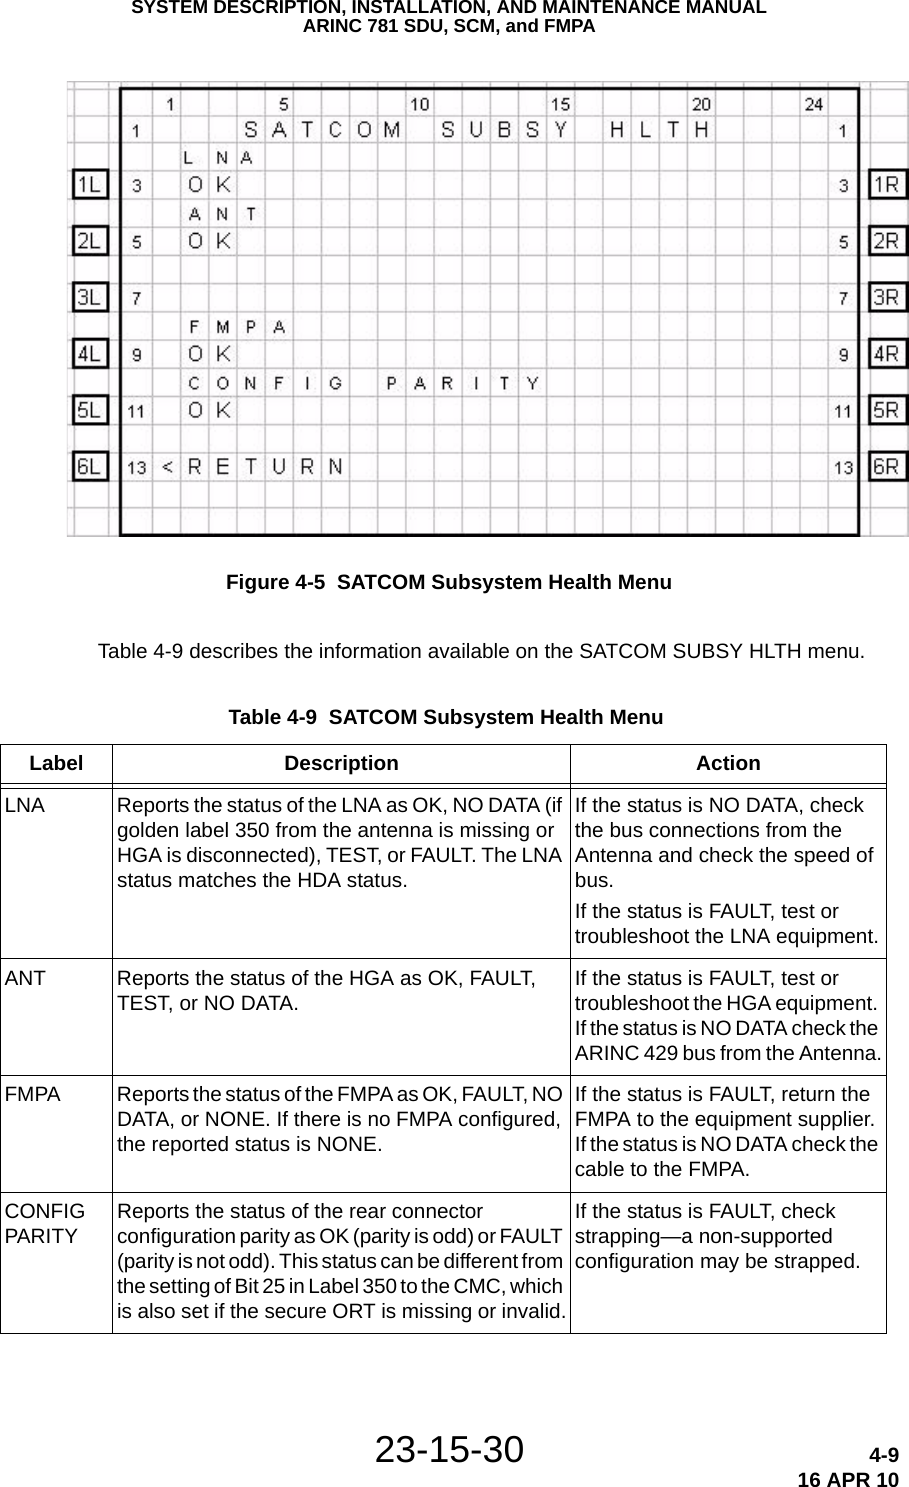 SYSTEM DESCRIPTION, INSTALLATION, AND MAINTENANCE MANUALARINC 781 SDU, SCM, and FMPA23-15-30 4-916 APR 10Figure 4-5  SATCOM Subsystem Health MenuTable 4-9 describes the information available on the SATCOM SUBSY HLTH menu. Table 4-9  SATCOM Subsystem Health Menu Label Description ActionLNA Reports the status of the LNA as OK, NO DATA (if golden label 350 from the antenna is missing or HGA is disconnected), TEST, or FAULT. The LNA status matches the HDA status.If the status is NO DATA, check the bus connections from the Antenna and check the speed of bus.If the status is FAULT, test or troubleshoot the LNA equipment.ANT Reports the status of the HGA as OK, FAULT, TEST, or NO DATA. If the status is FAULT, test or troubleshoot the HGA equipment. If the status is NO DATA check the ARINC 429 bus from the Antenna.FMPA Reports the status of the FMPA as OK, FAULT, NO DATA, or NONE. If there is no FMPA configured, the reported status is NONE.If the status is FAULT, return the FMPA to the equipment supplier. If the status is NO DATA check the cable to the FMPA.CONFIG PARITY Reports the status of the rear connector configuration parity as OK (parity is odd) or FAULT (parity is not odd). This status can be different from the setting of Bit 25 in Label 350 to the CMC, which is also set if the secure ORT is missing or invalid.If the status is FAULT, check strapping—a non-supported configuration may be strapped.